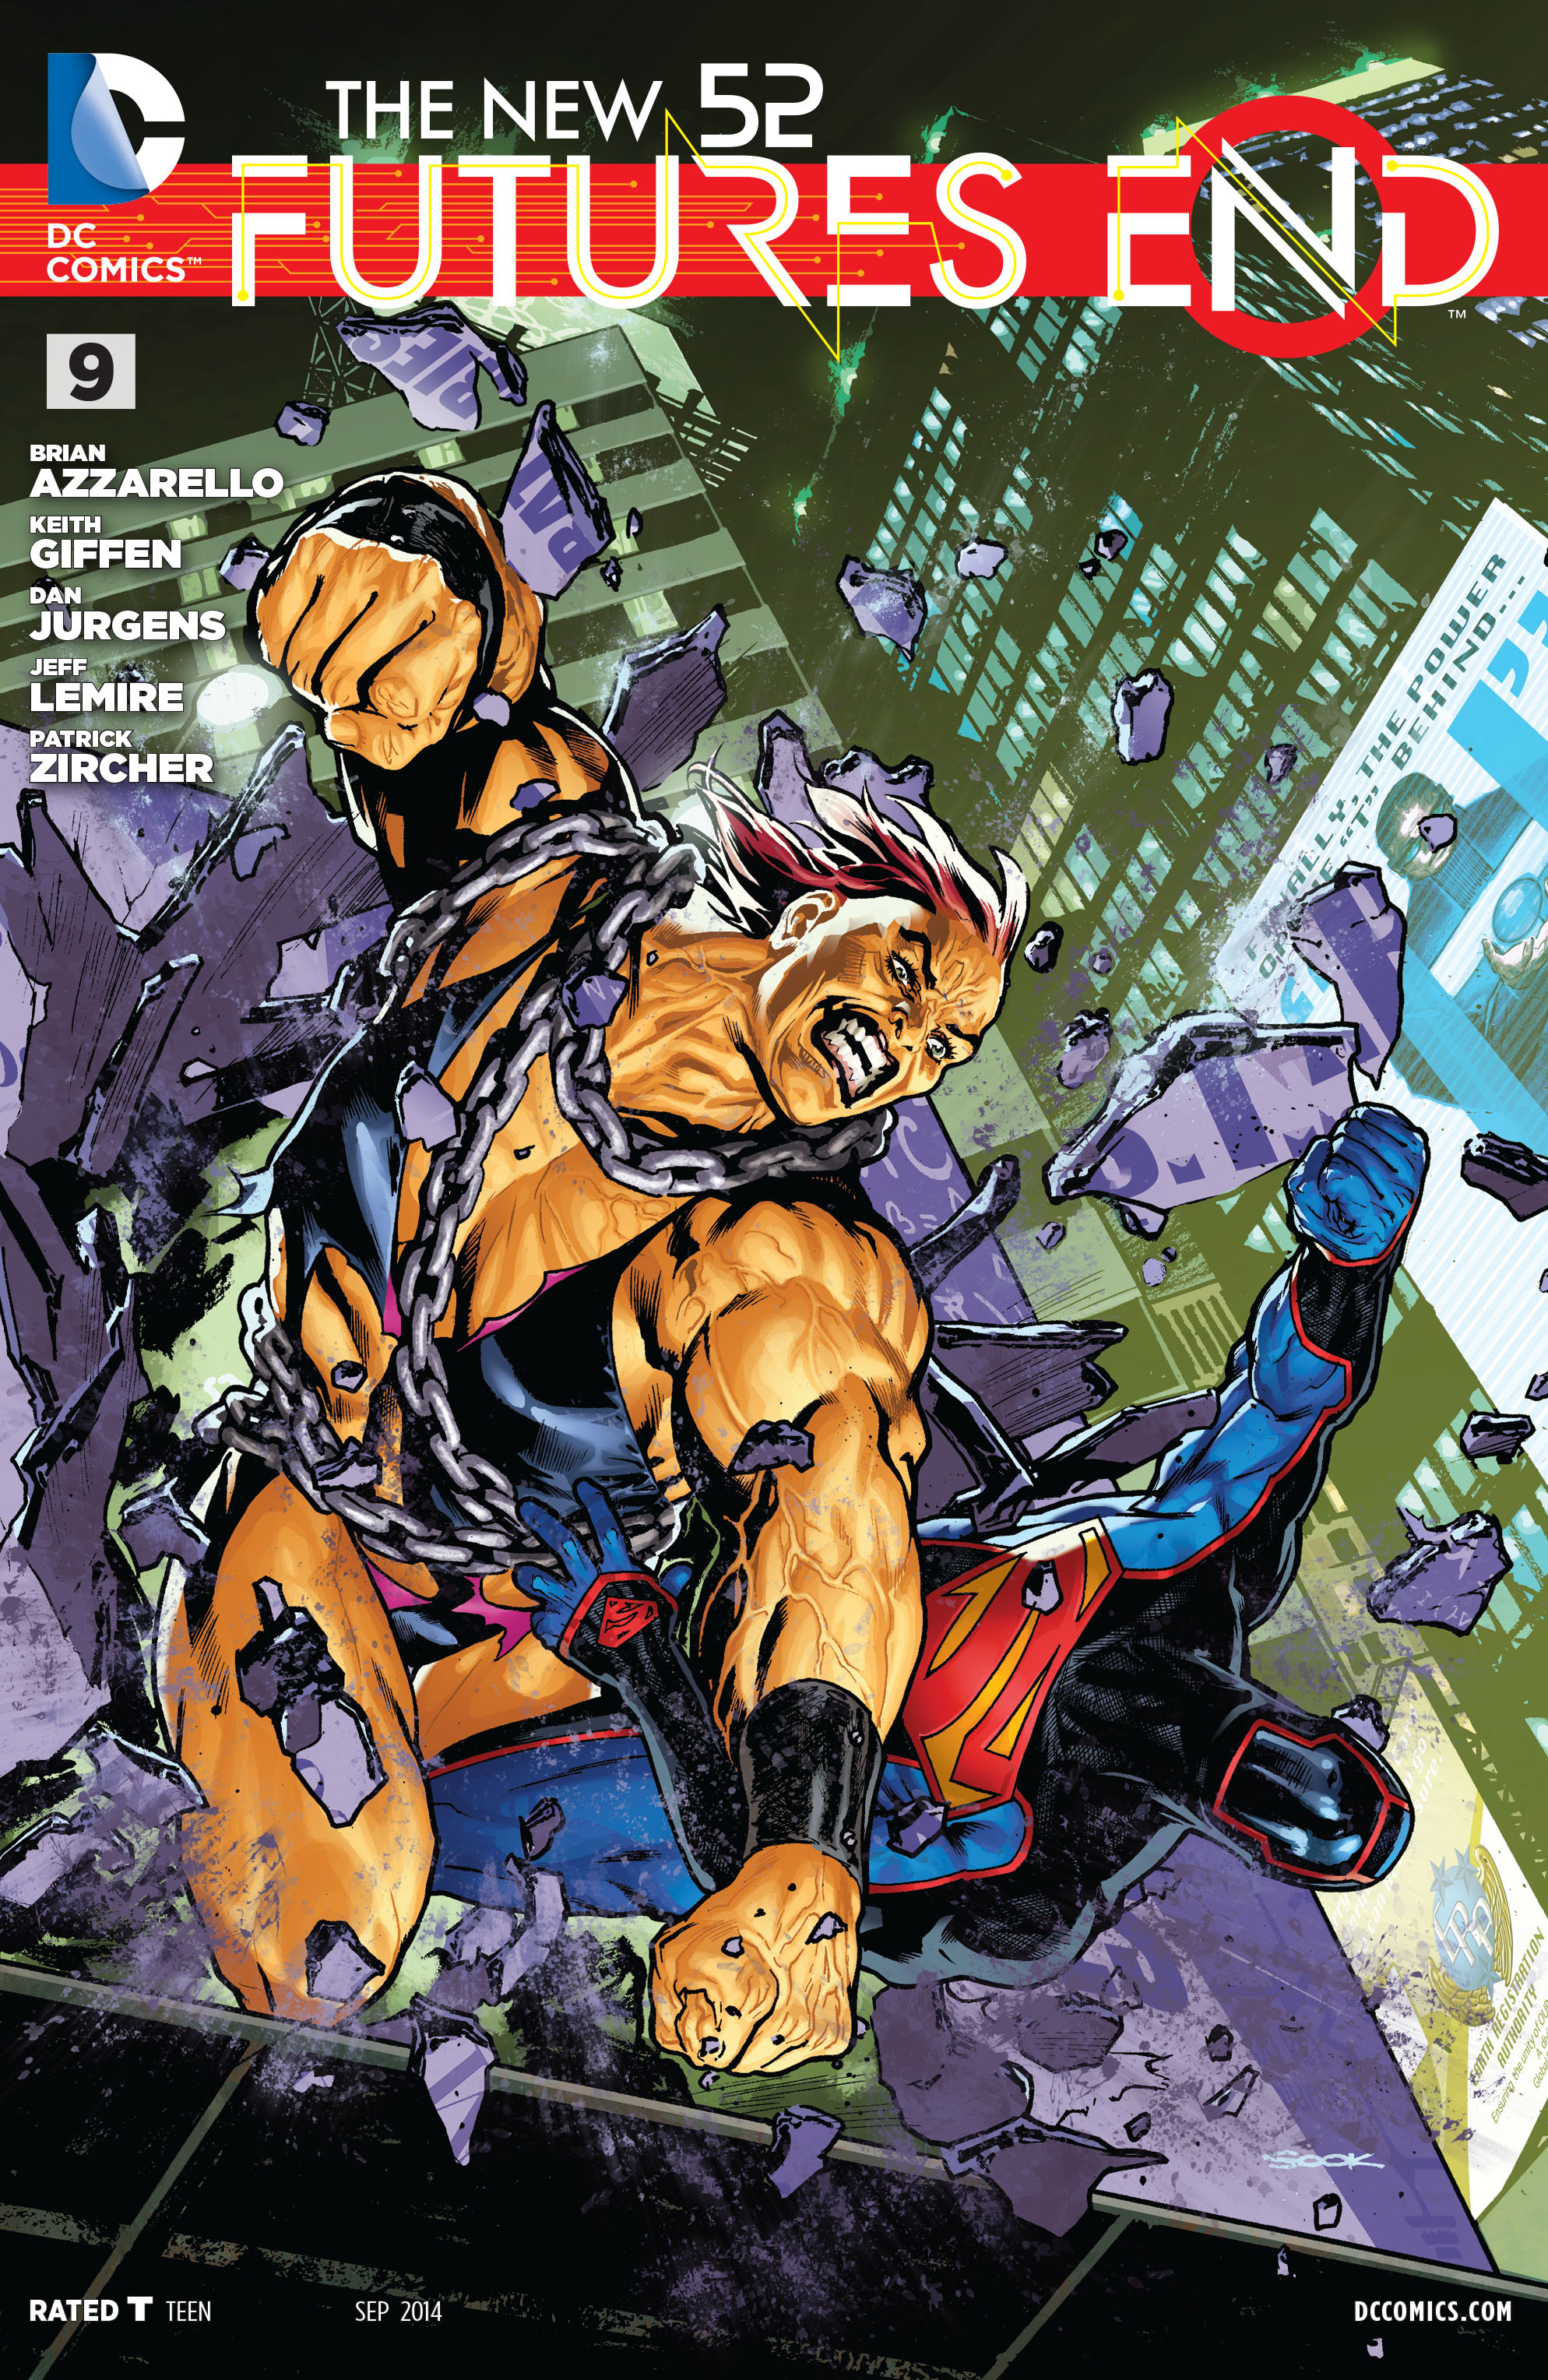 New 52 Futures End #9